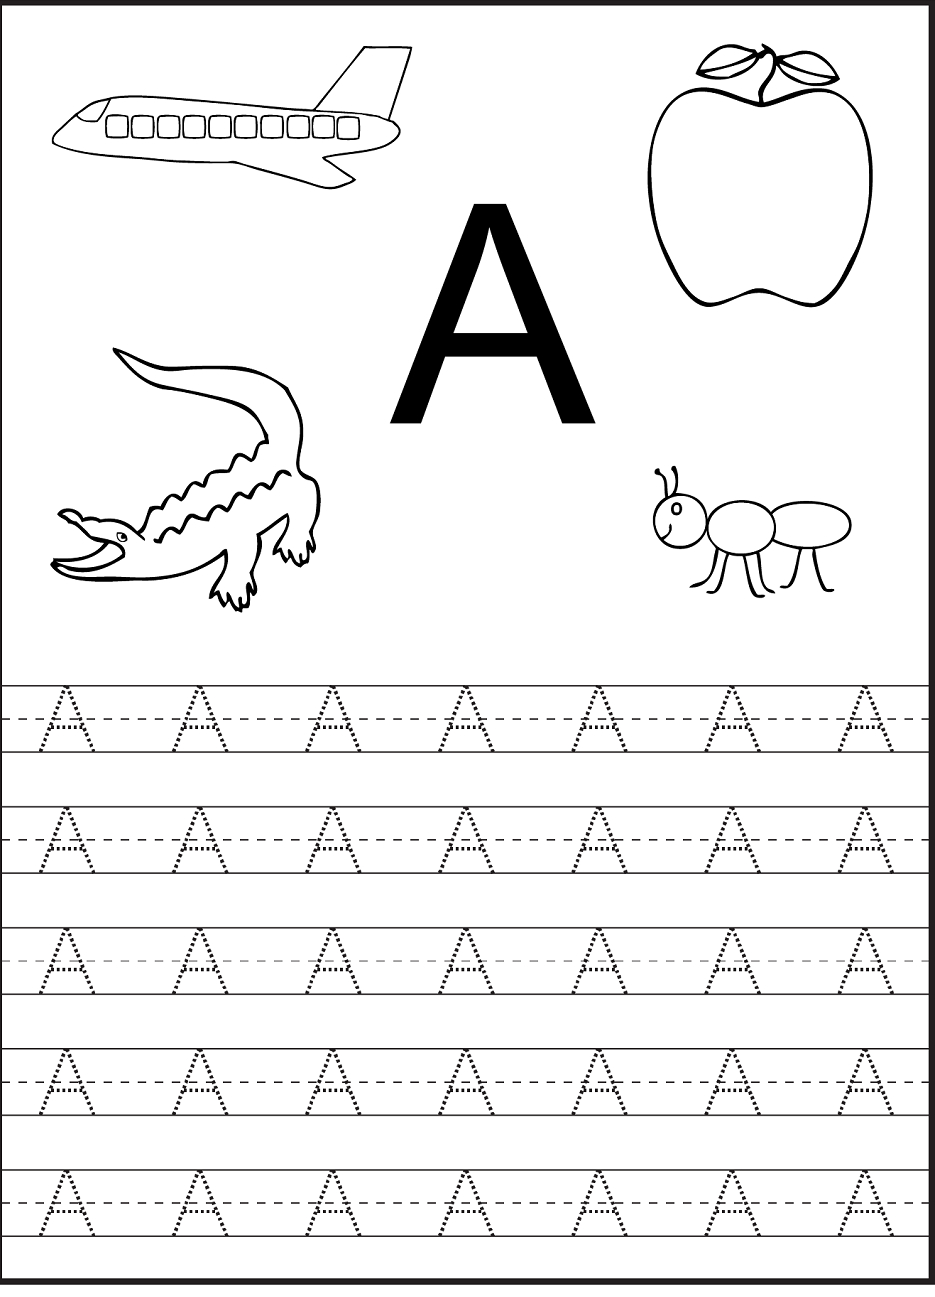 Tracing The Letter A Free Printable | Preschool Worksheets with regard to Free Printable Preschool Worksheets Tracing Letters